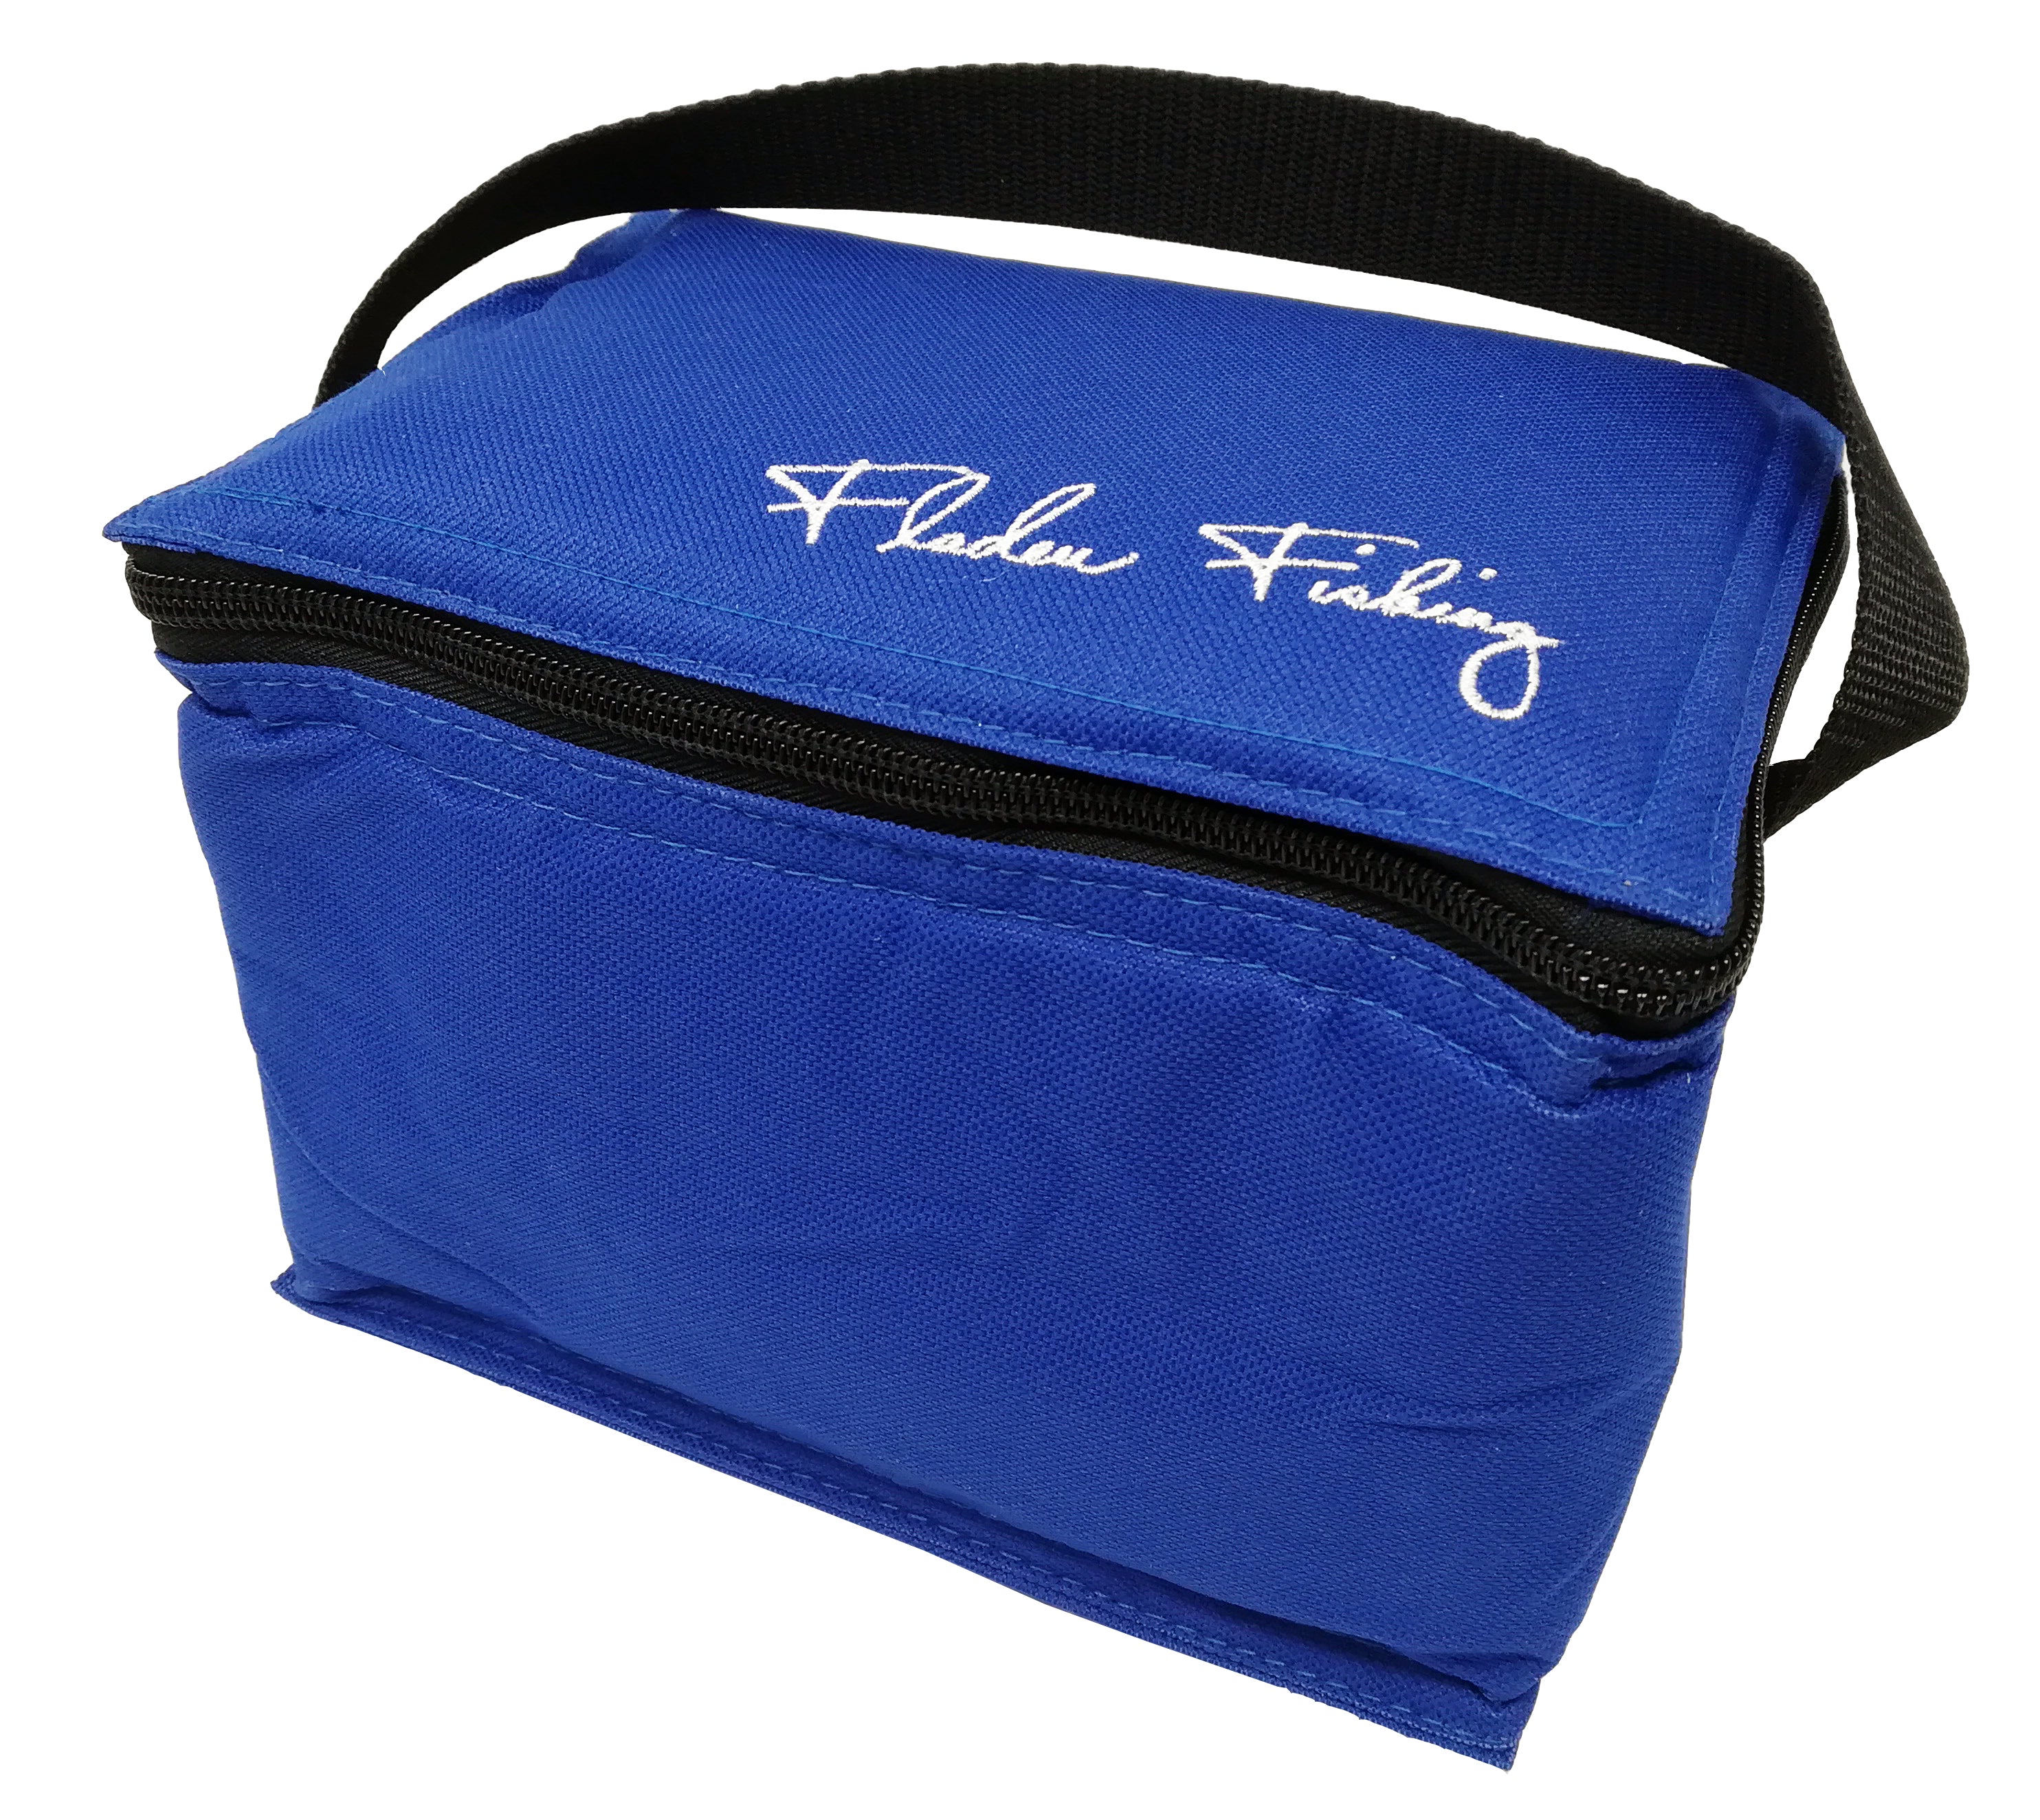 Fladen Fishing 3L Small Cool Bag - Ideal For Fishing Bait Food and Drinks